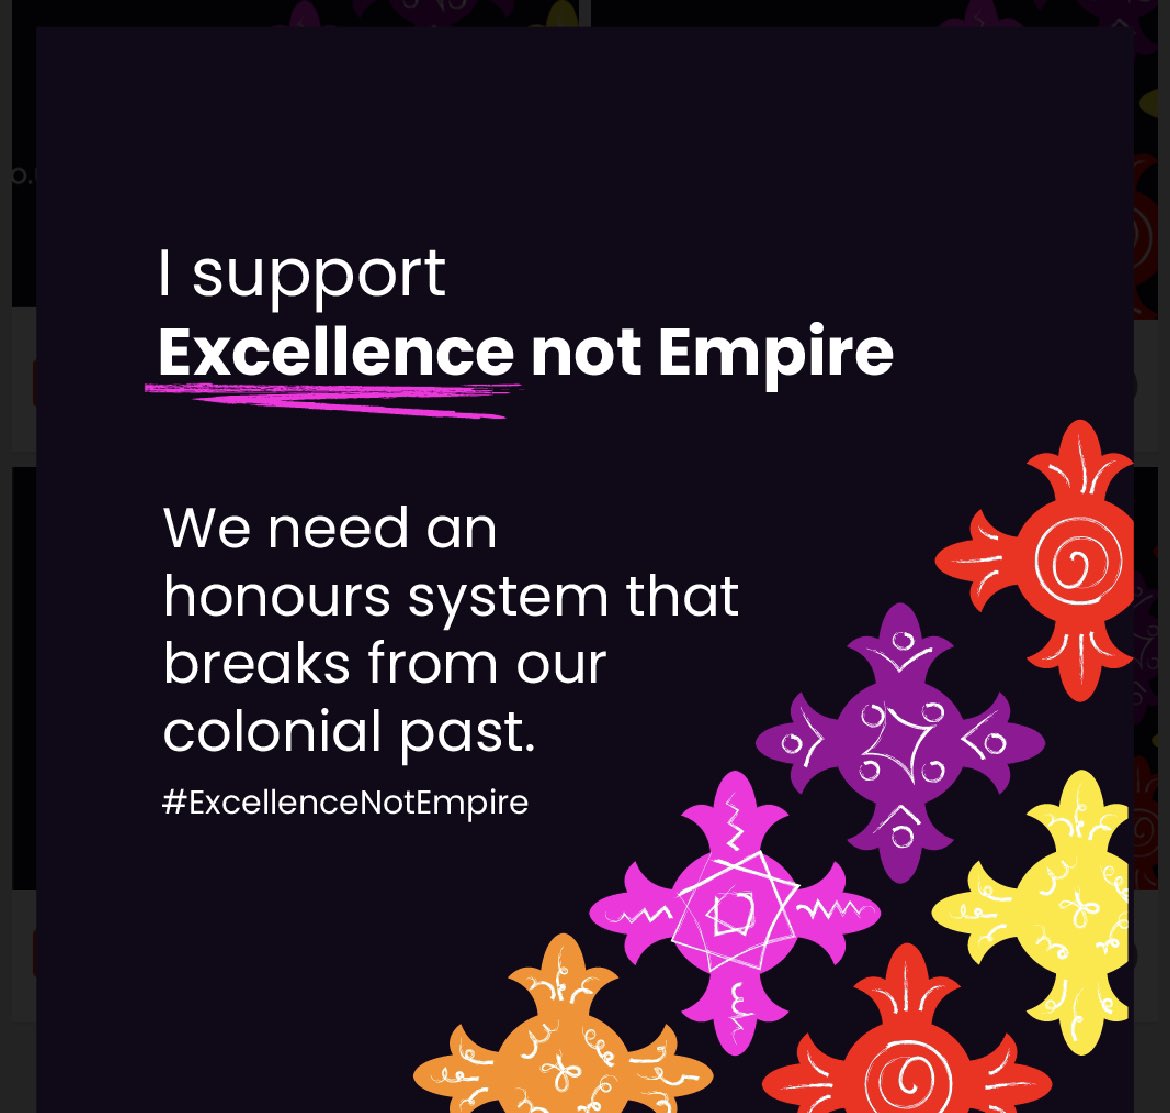 Congratulations to everyone bestowed an Honour in the Kings Birthday List. If you believe the honours system needs to break from our colonial past join us in campaigning for a simple name change at #ExcellenceNotEmpire